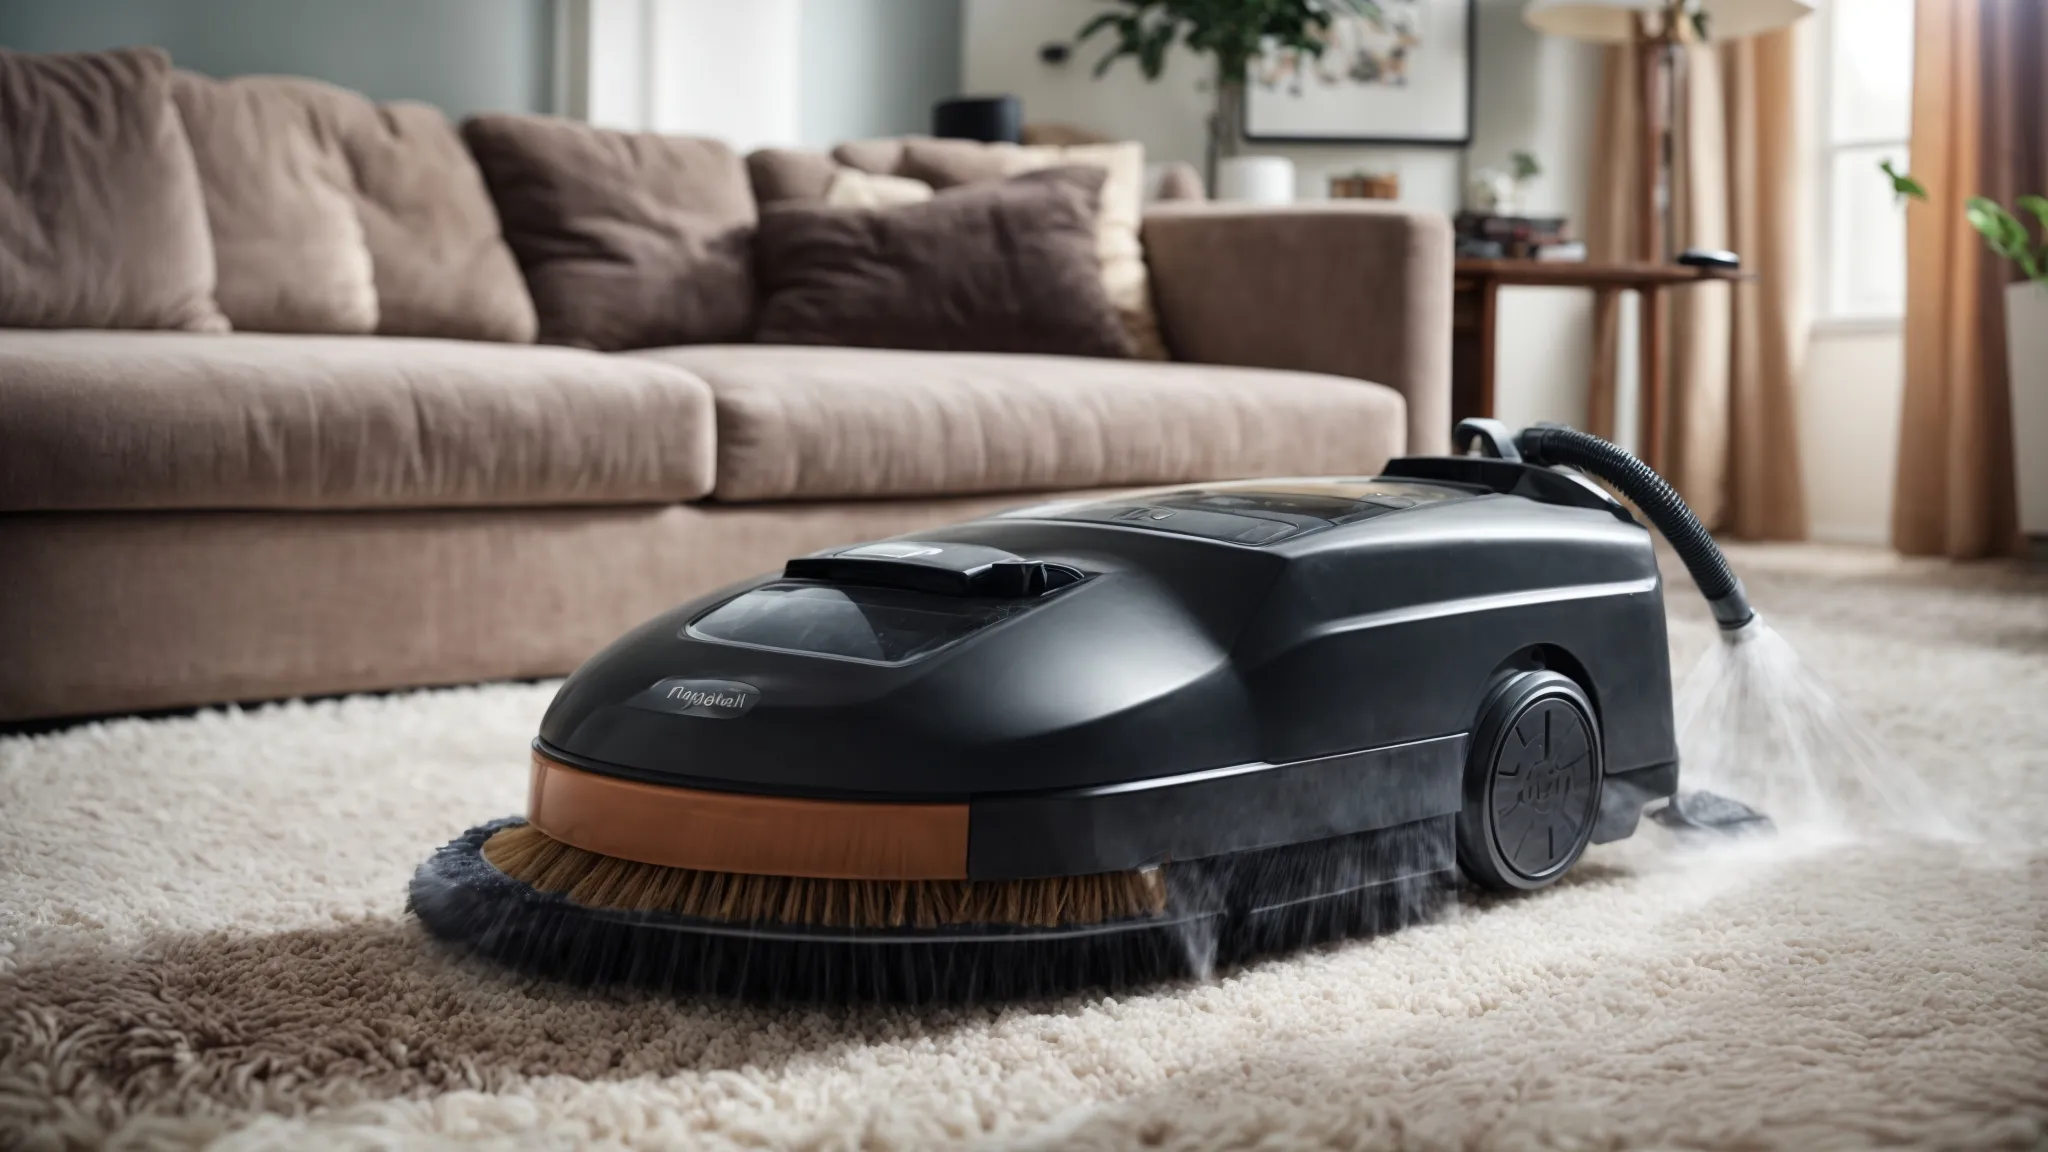 a professional carpet cleaning machine deep cleans a soiled carpet within a bright living room.